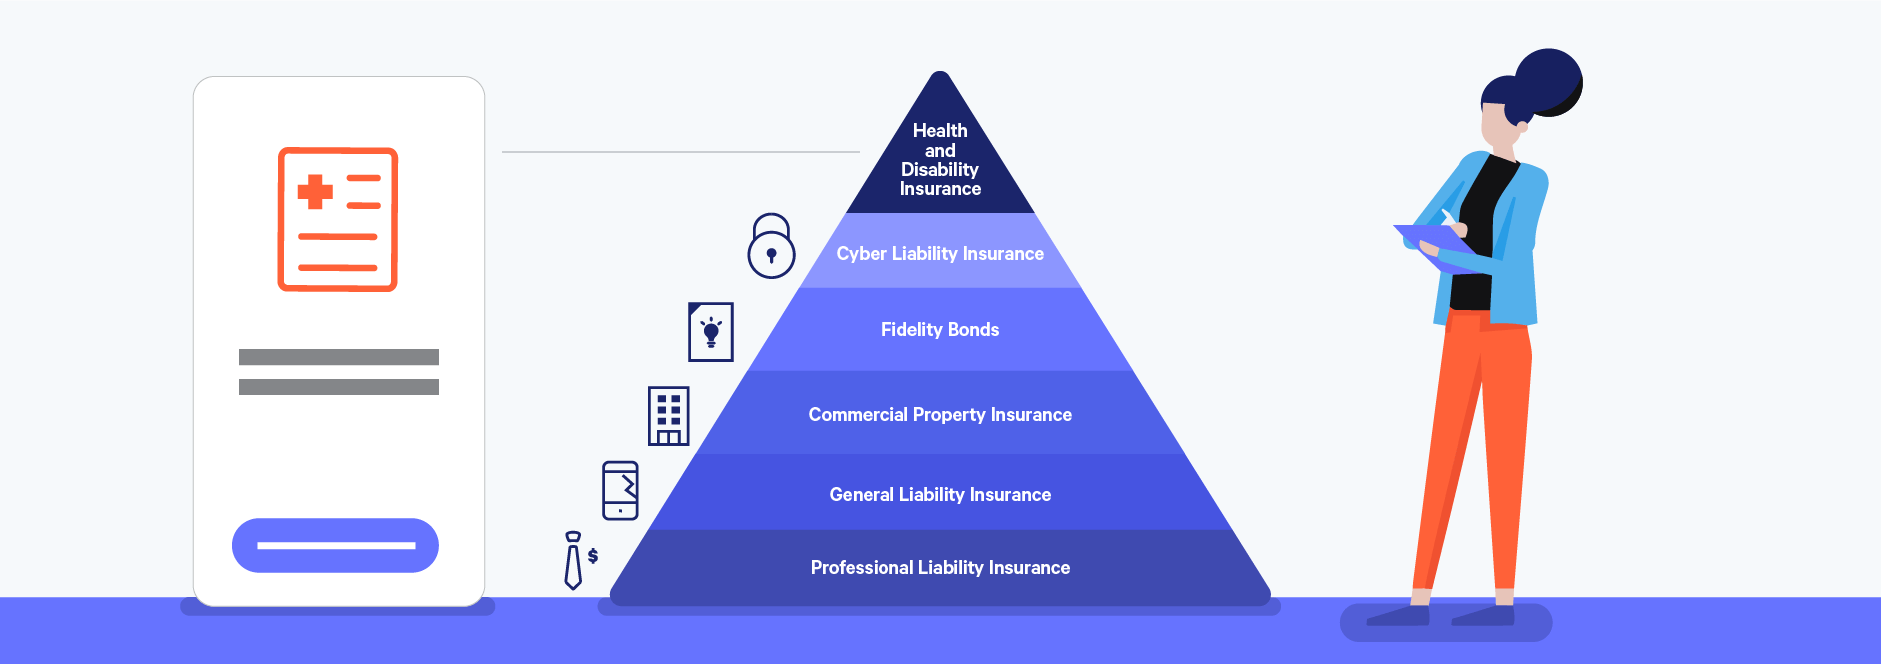 health and disability insurance as a key freelance insurance policy illustration